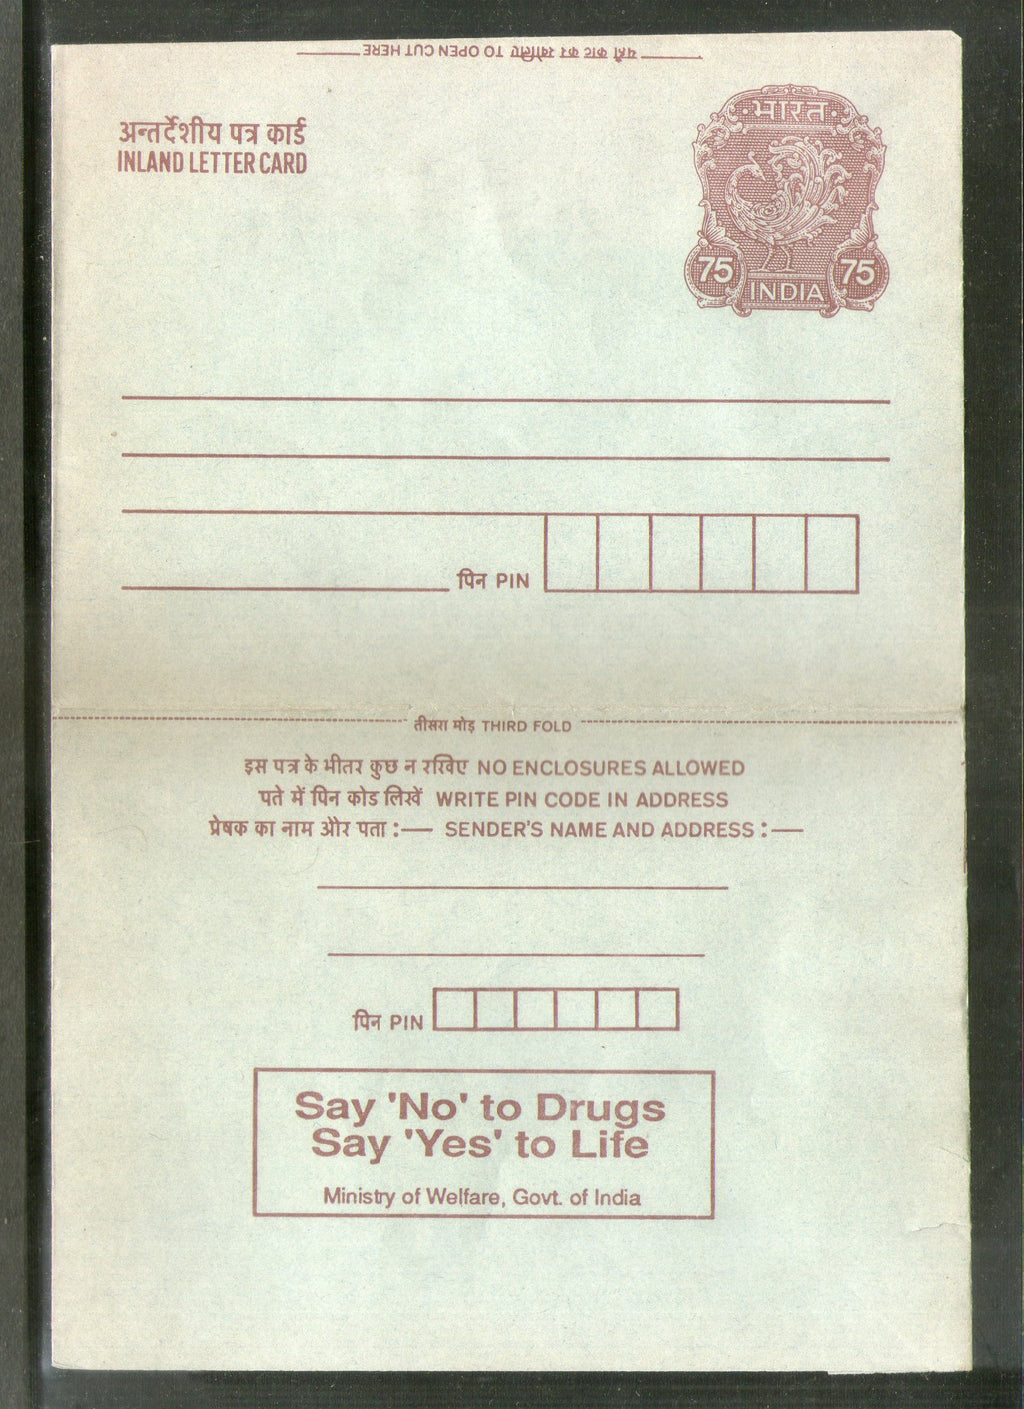 India 1993 75p Peacock Inland Letter Card with Anti Drugs Slogan Advertisement ILC MINT # 345FL